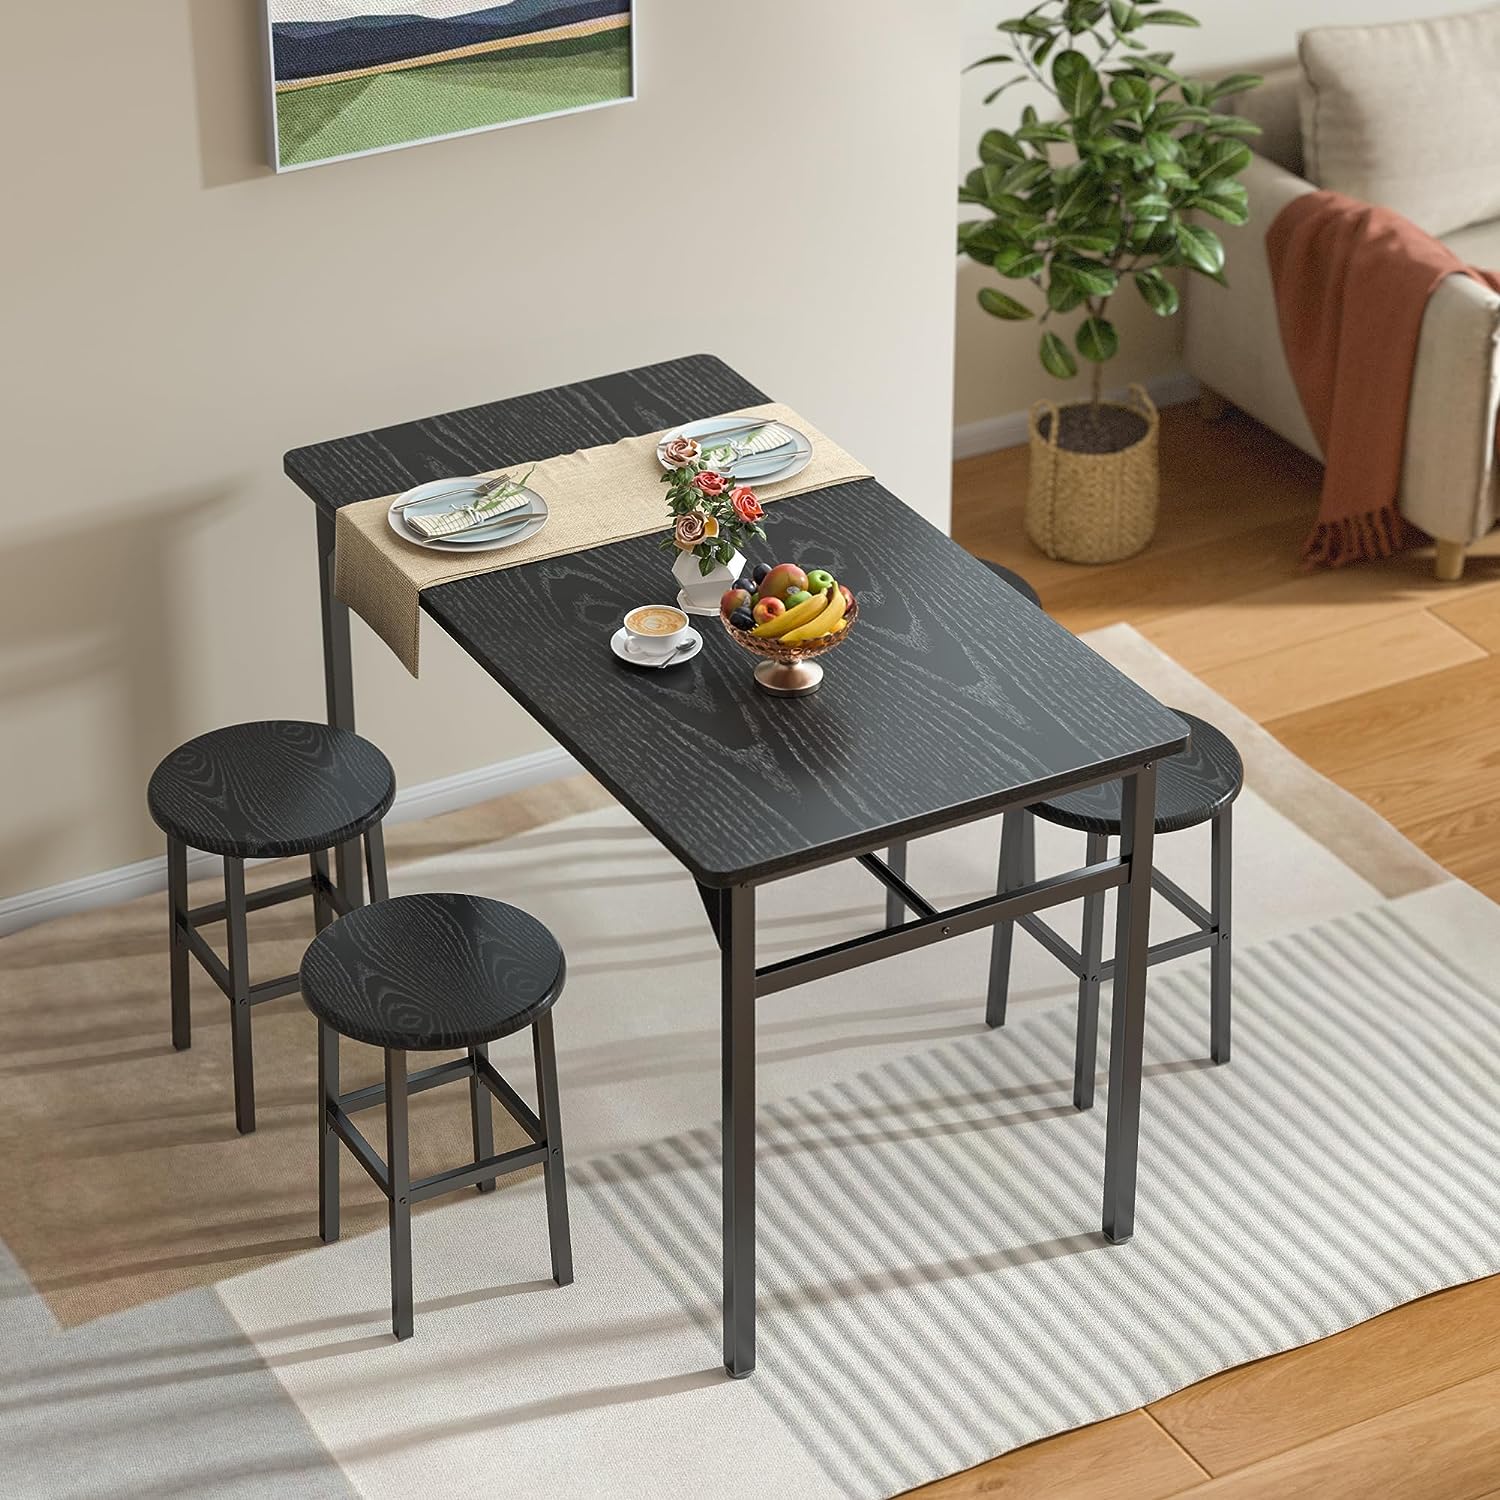 Lofka Dining Table Set for 4, Kitchen Table and 4 Stools on Breakfast ...